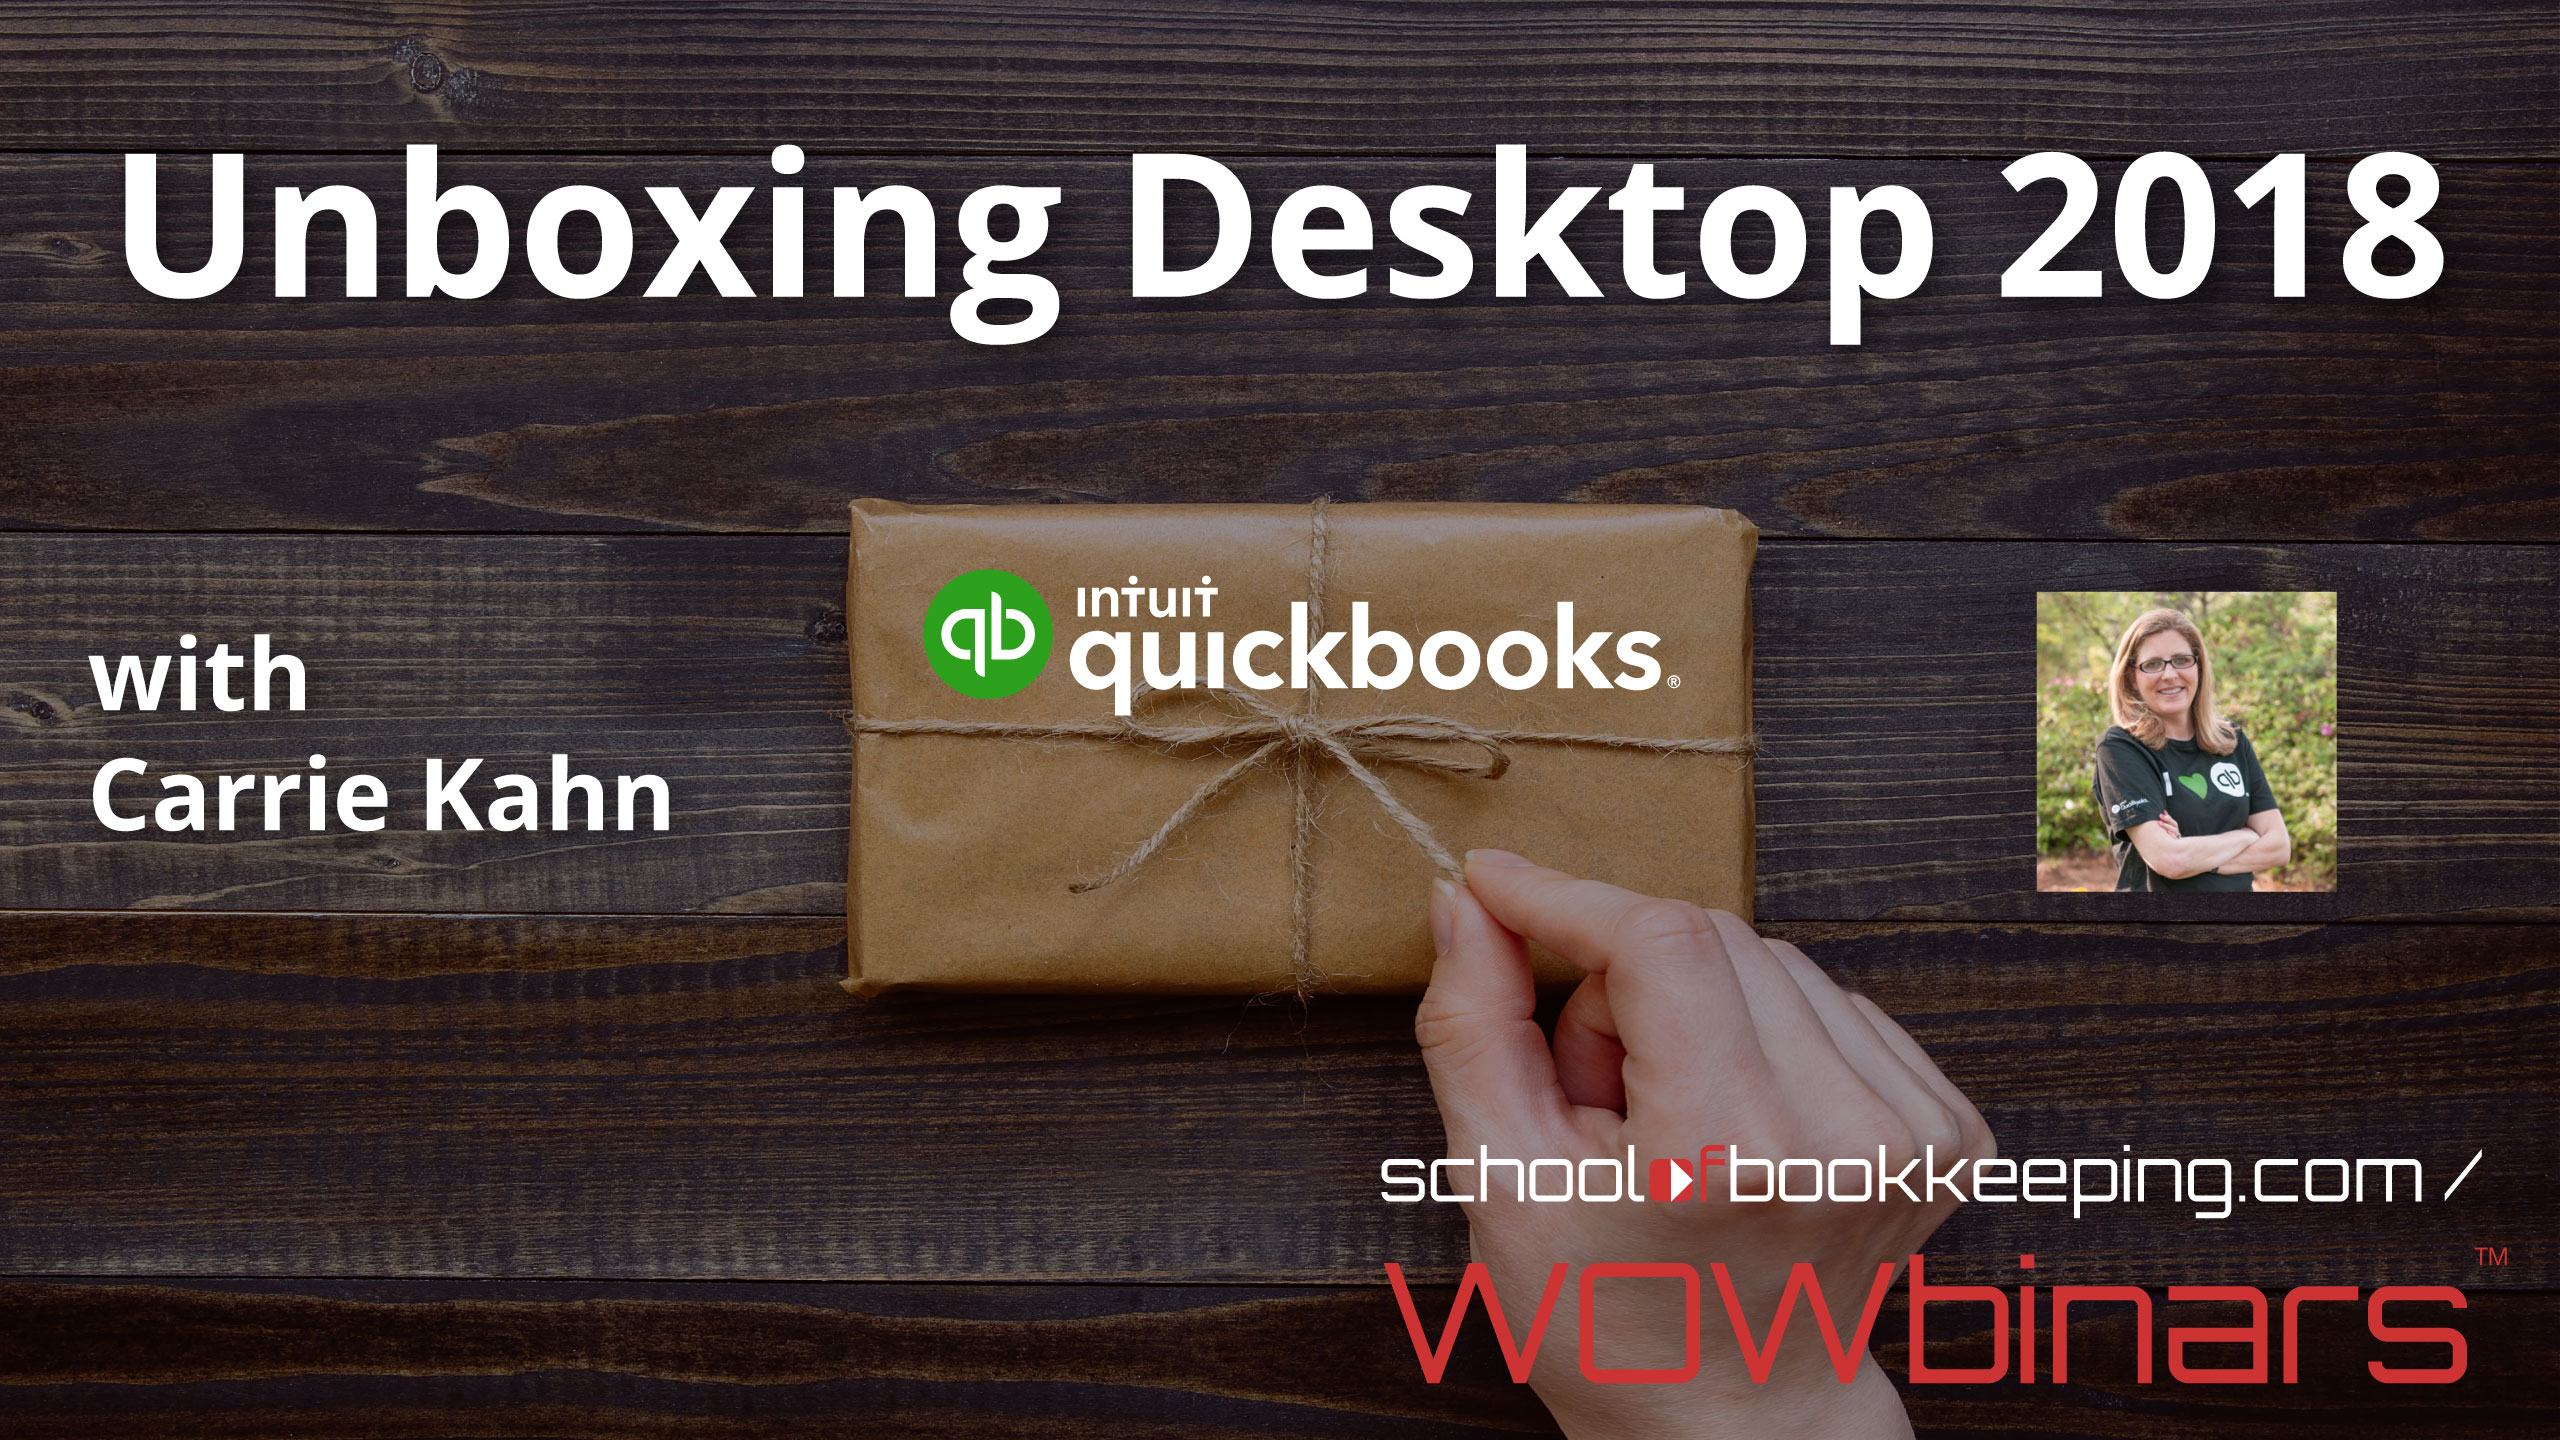 Featured image for “QUICKBOOKS 2018 UNBOXING”